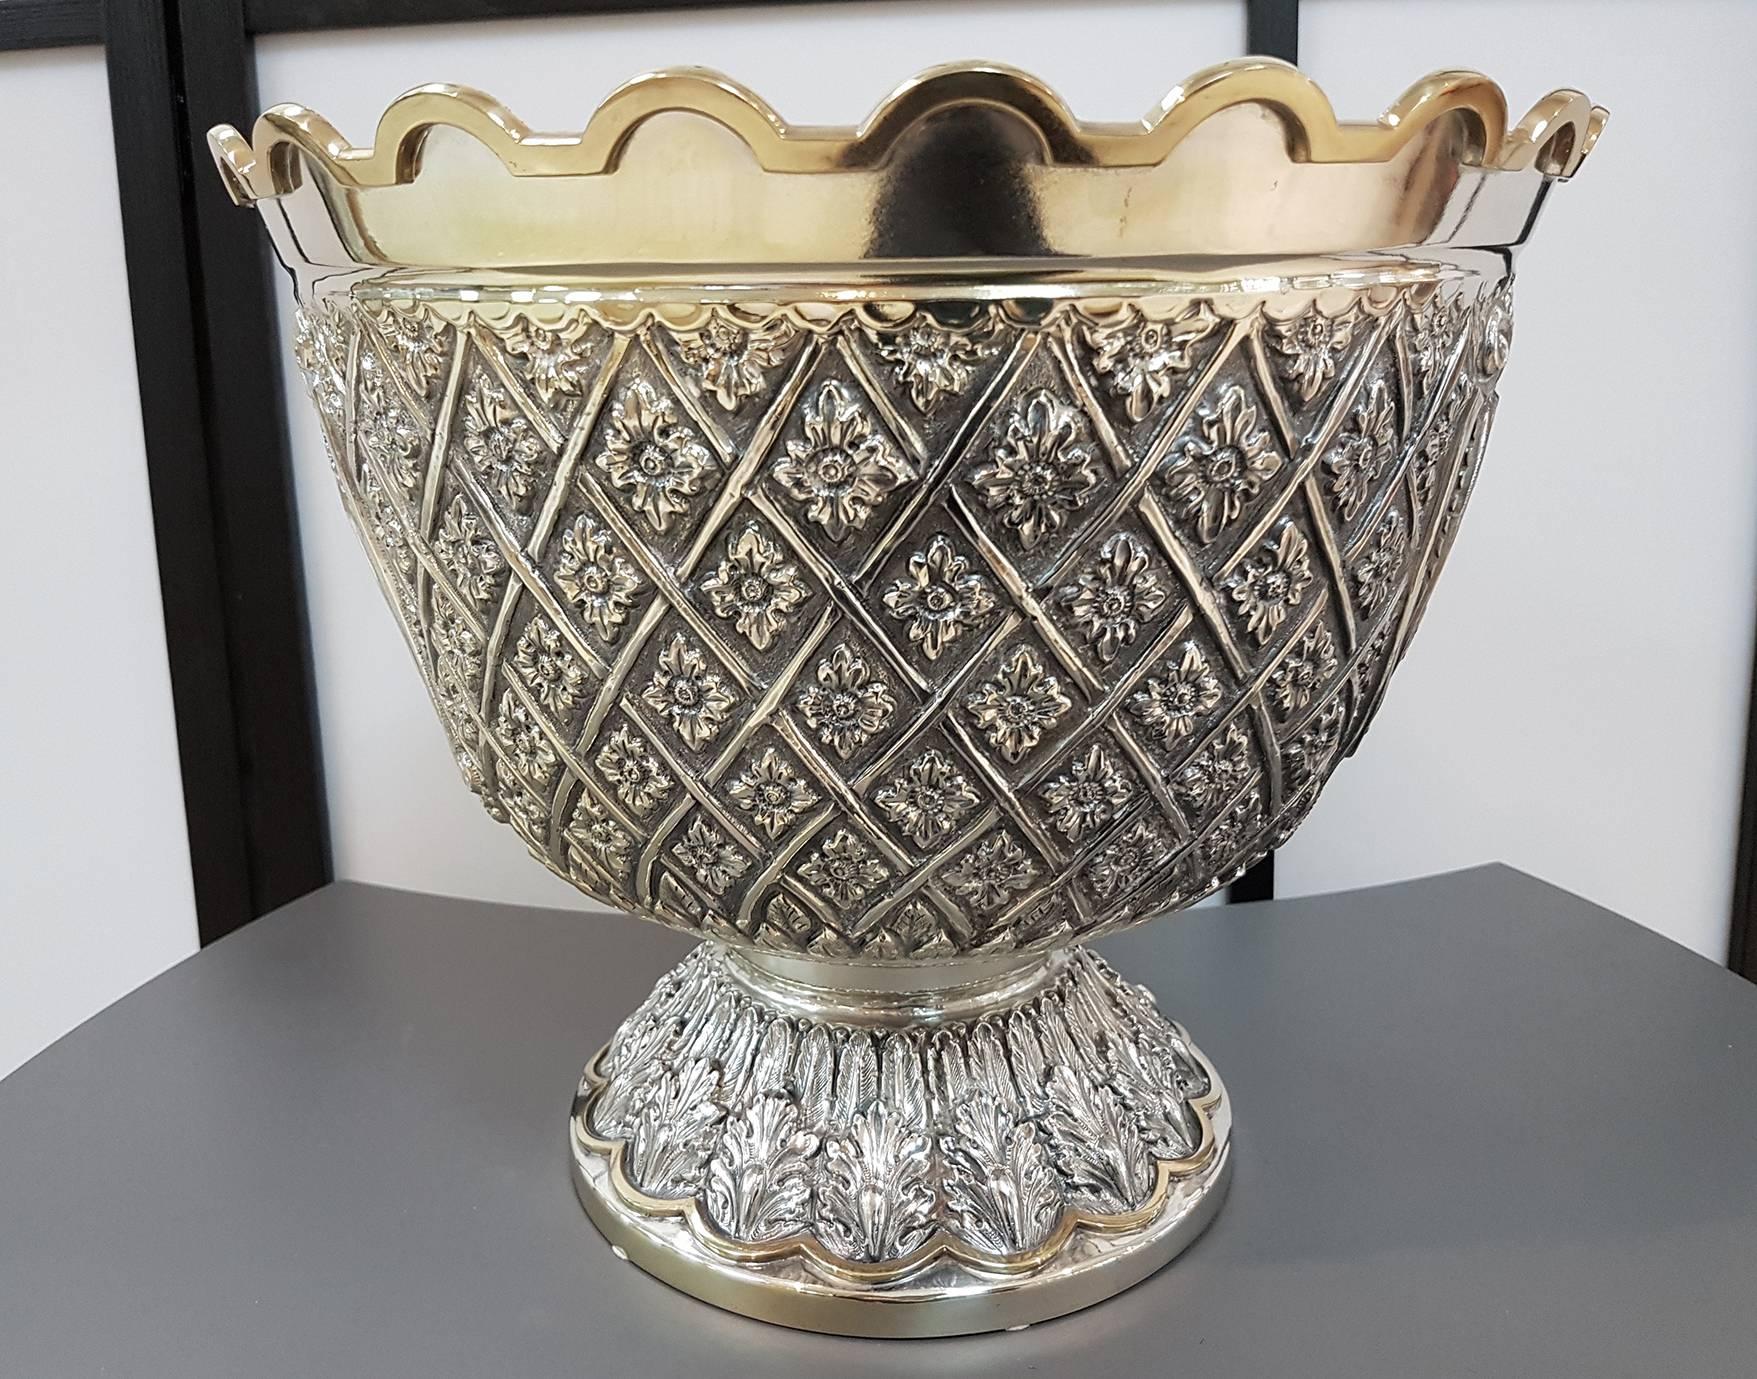 A solid silver cone shaped trunk whose rim is a scallop shaped and gilt, laid on a leaf-chiselled base.
The body is embossed and chiselled with flowers encased in a trellis and, on the two opposite sides. It is endowed with two, gold-plated